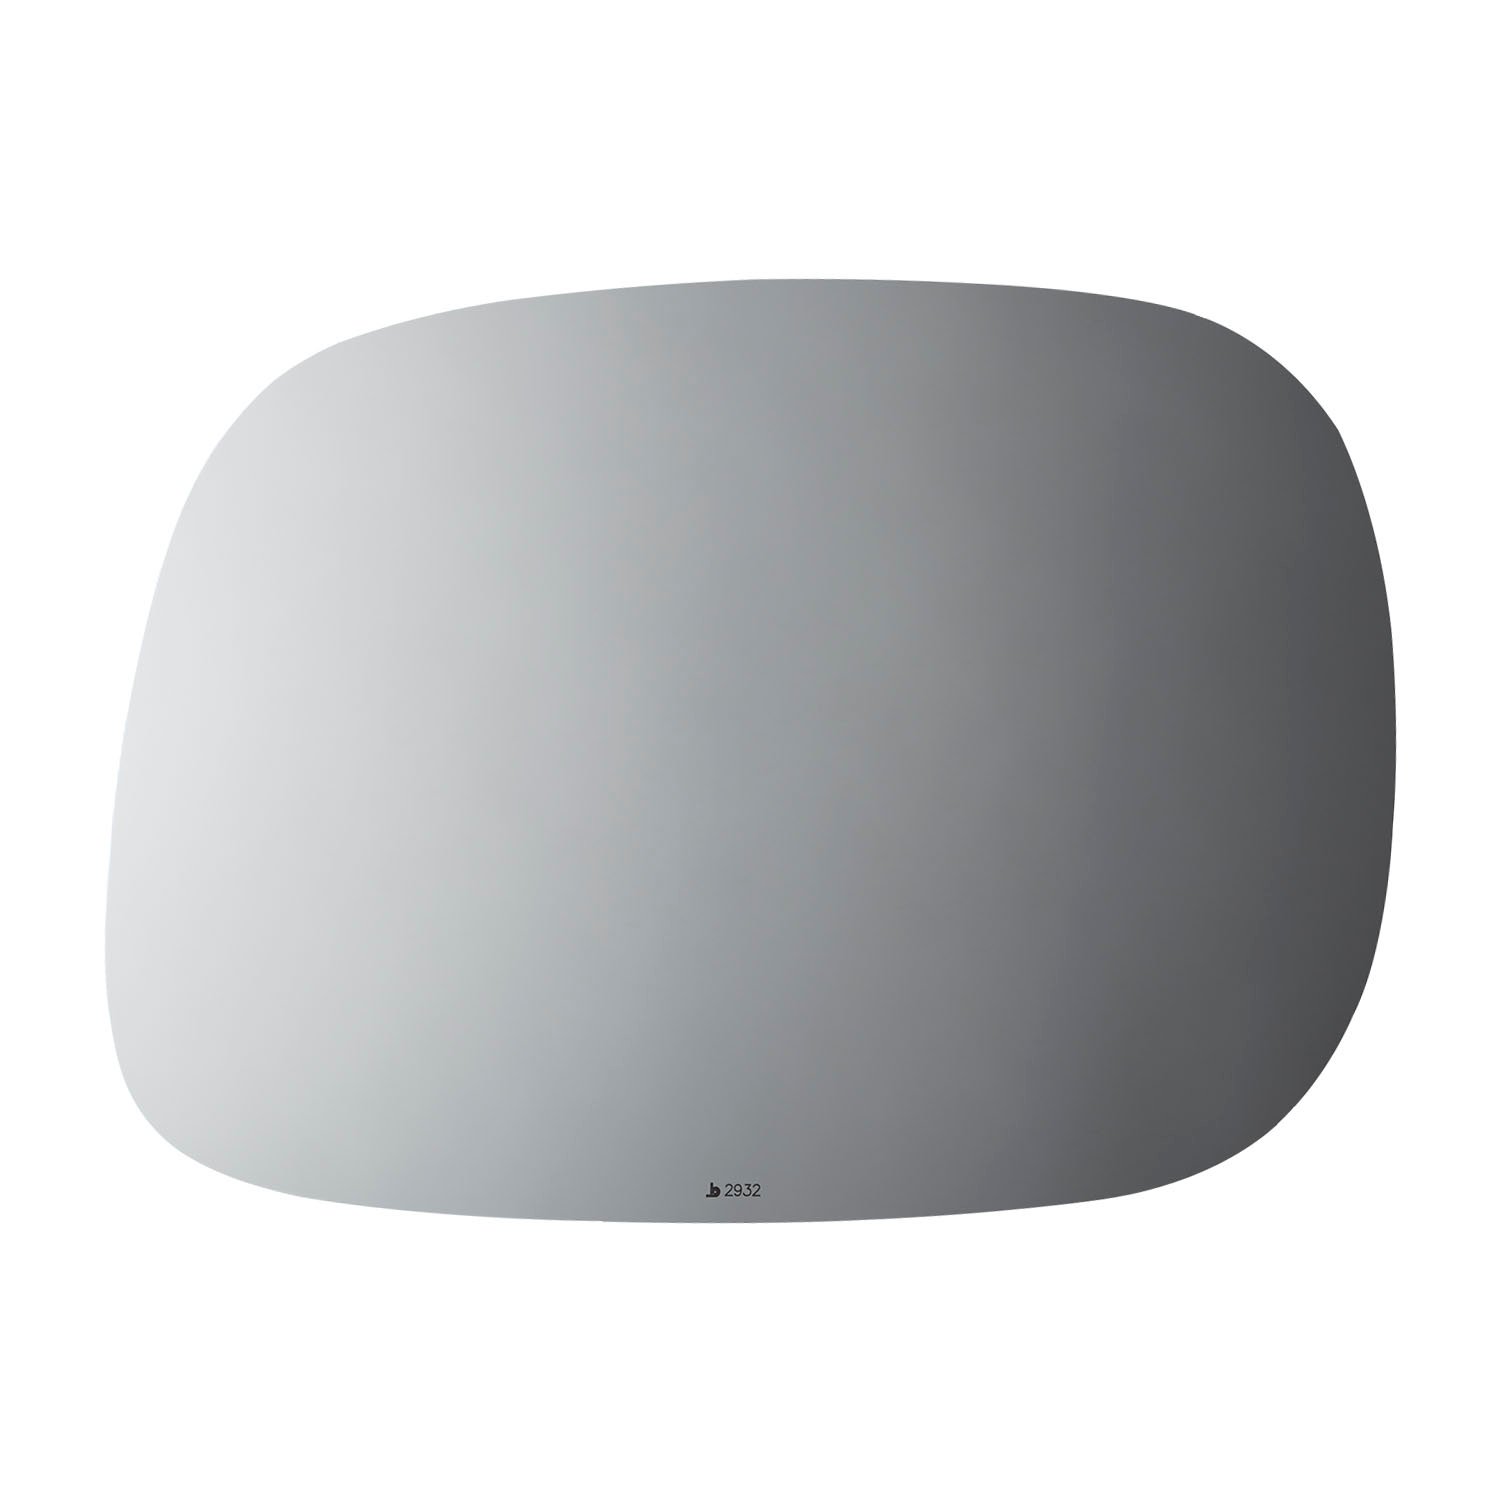 2932 SIDE VIEW MIRROR